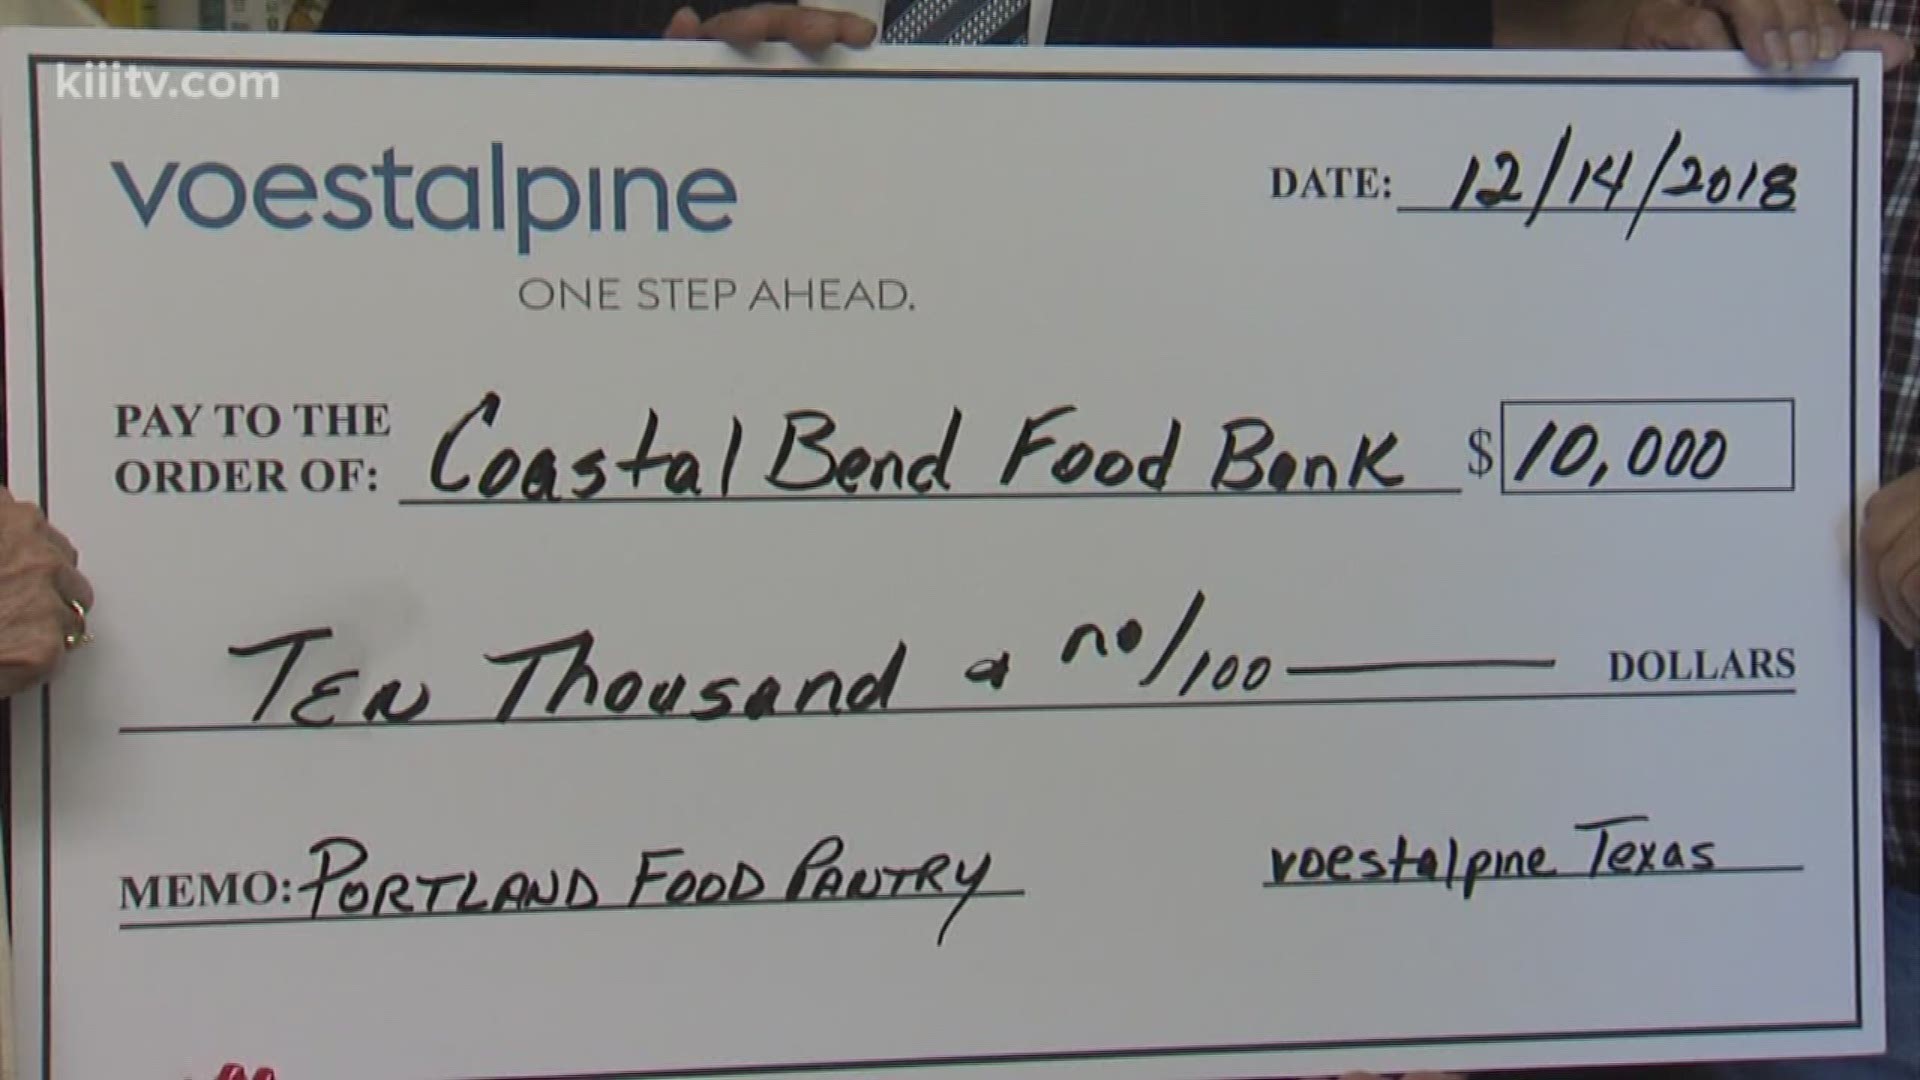 The City of Portland, which is still recovering from Hurricane Harvey, got some major help Friday thanks to a donation from the nearby Voestalpine plant.